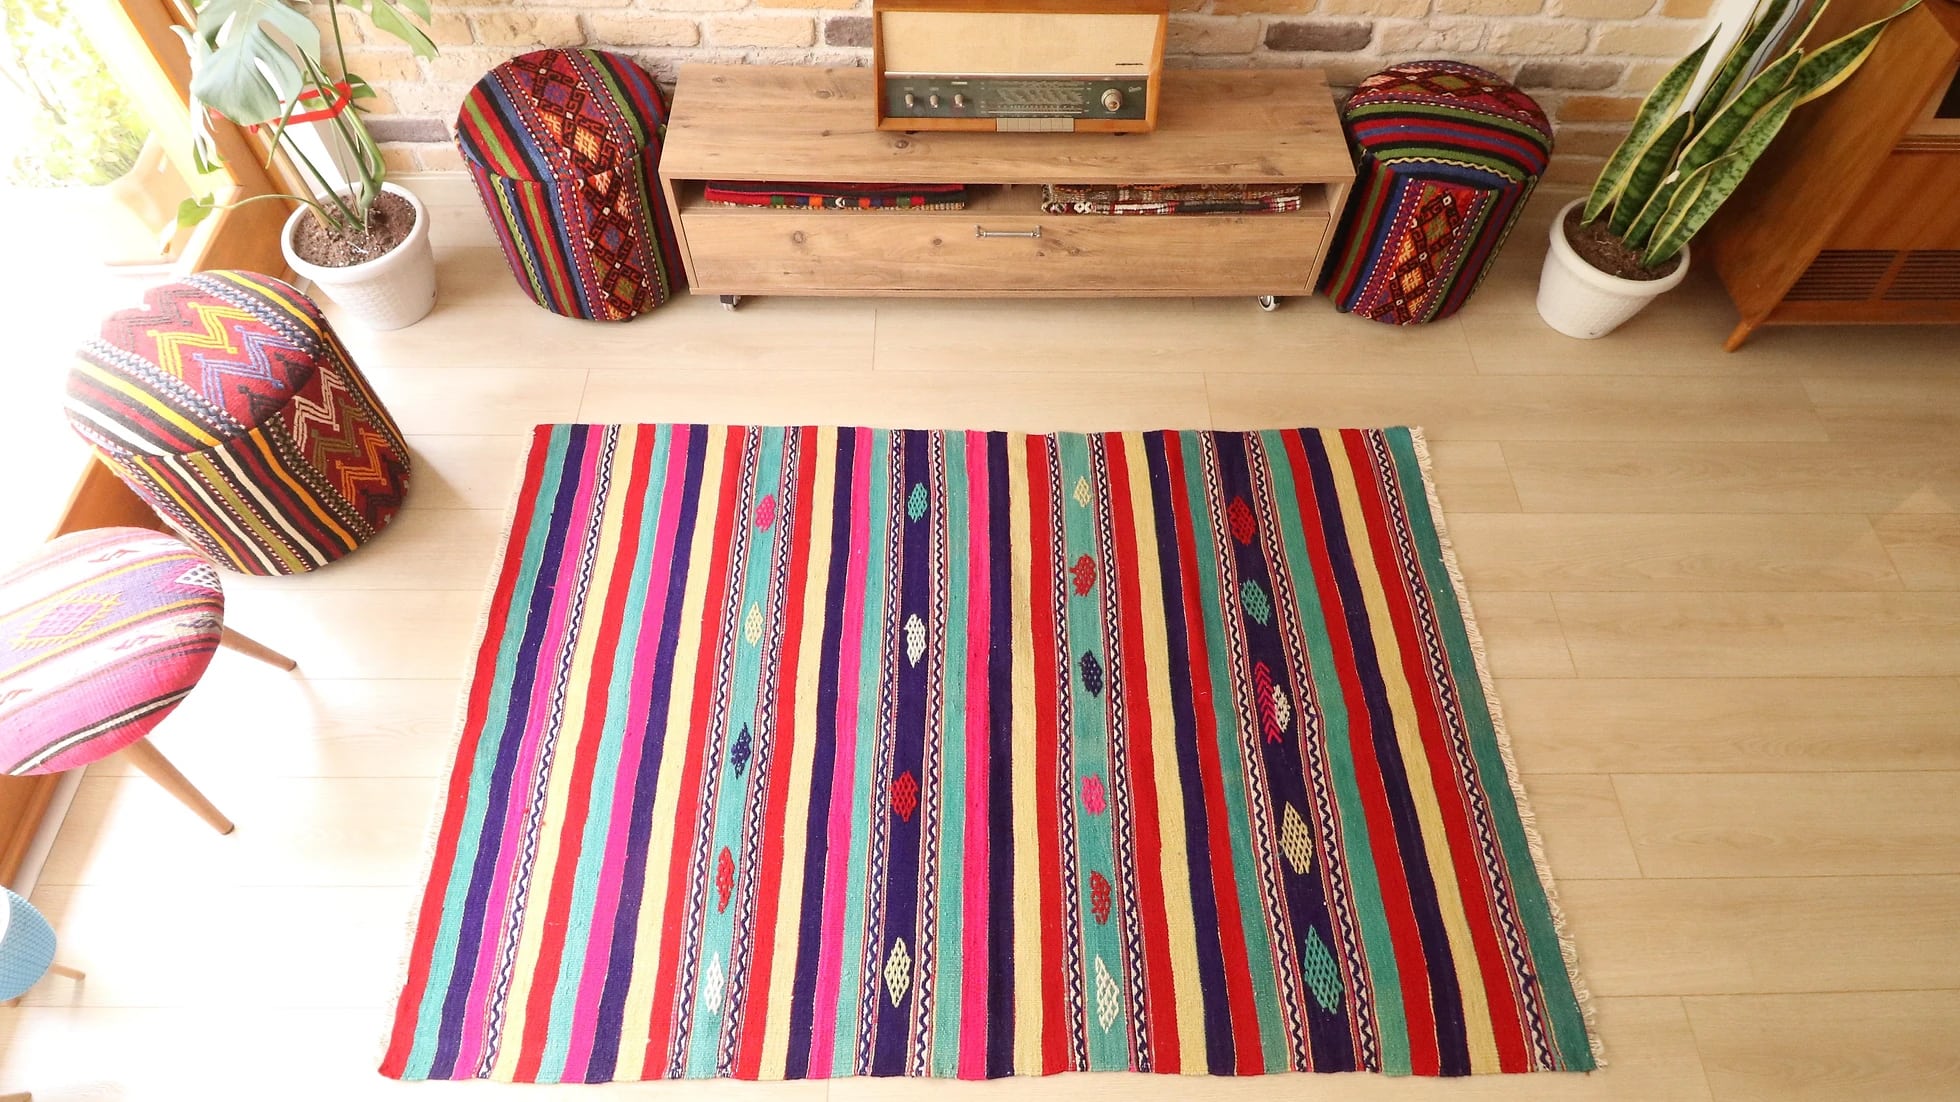 handknotted Turkish Rug in colorful striped patterns in NYC rug gallery